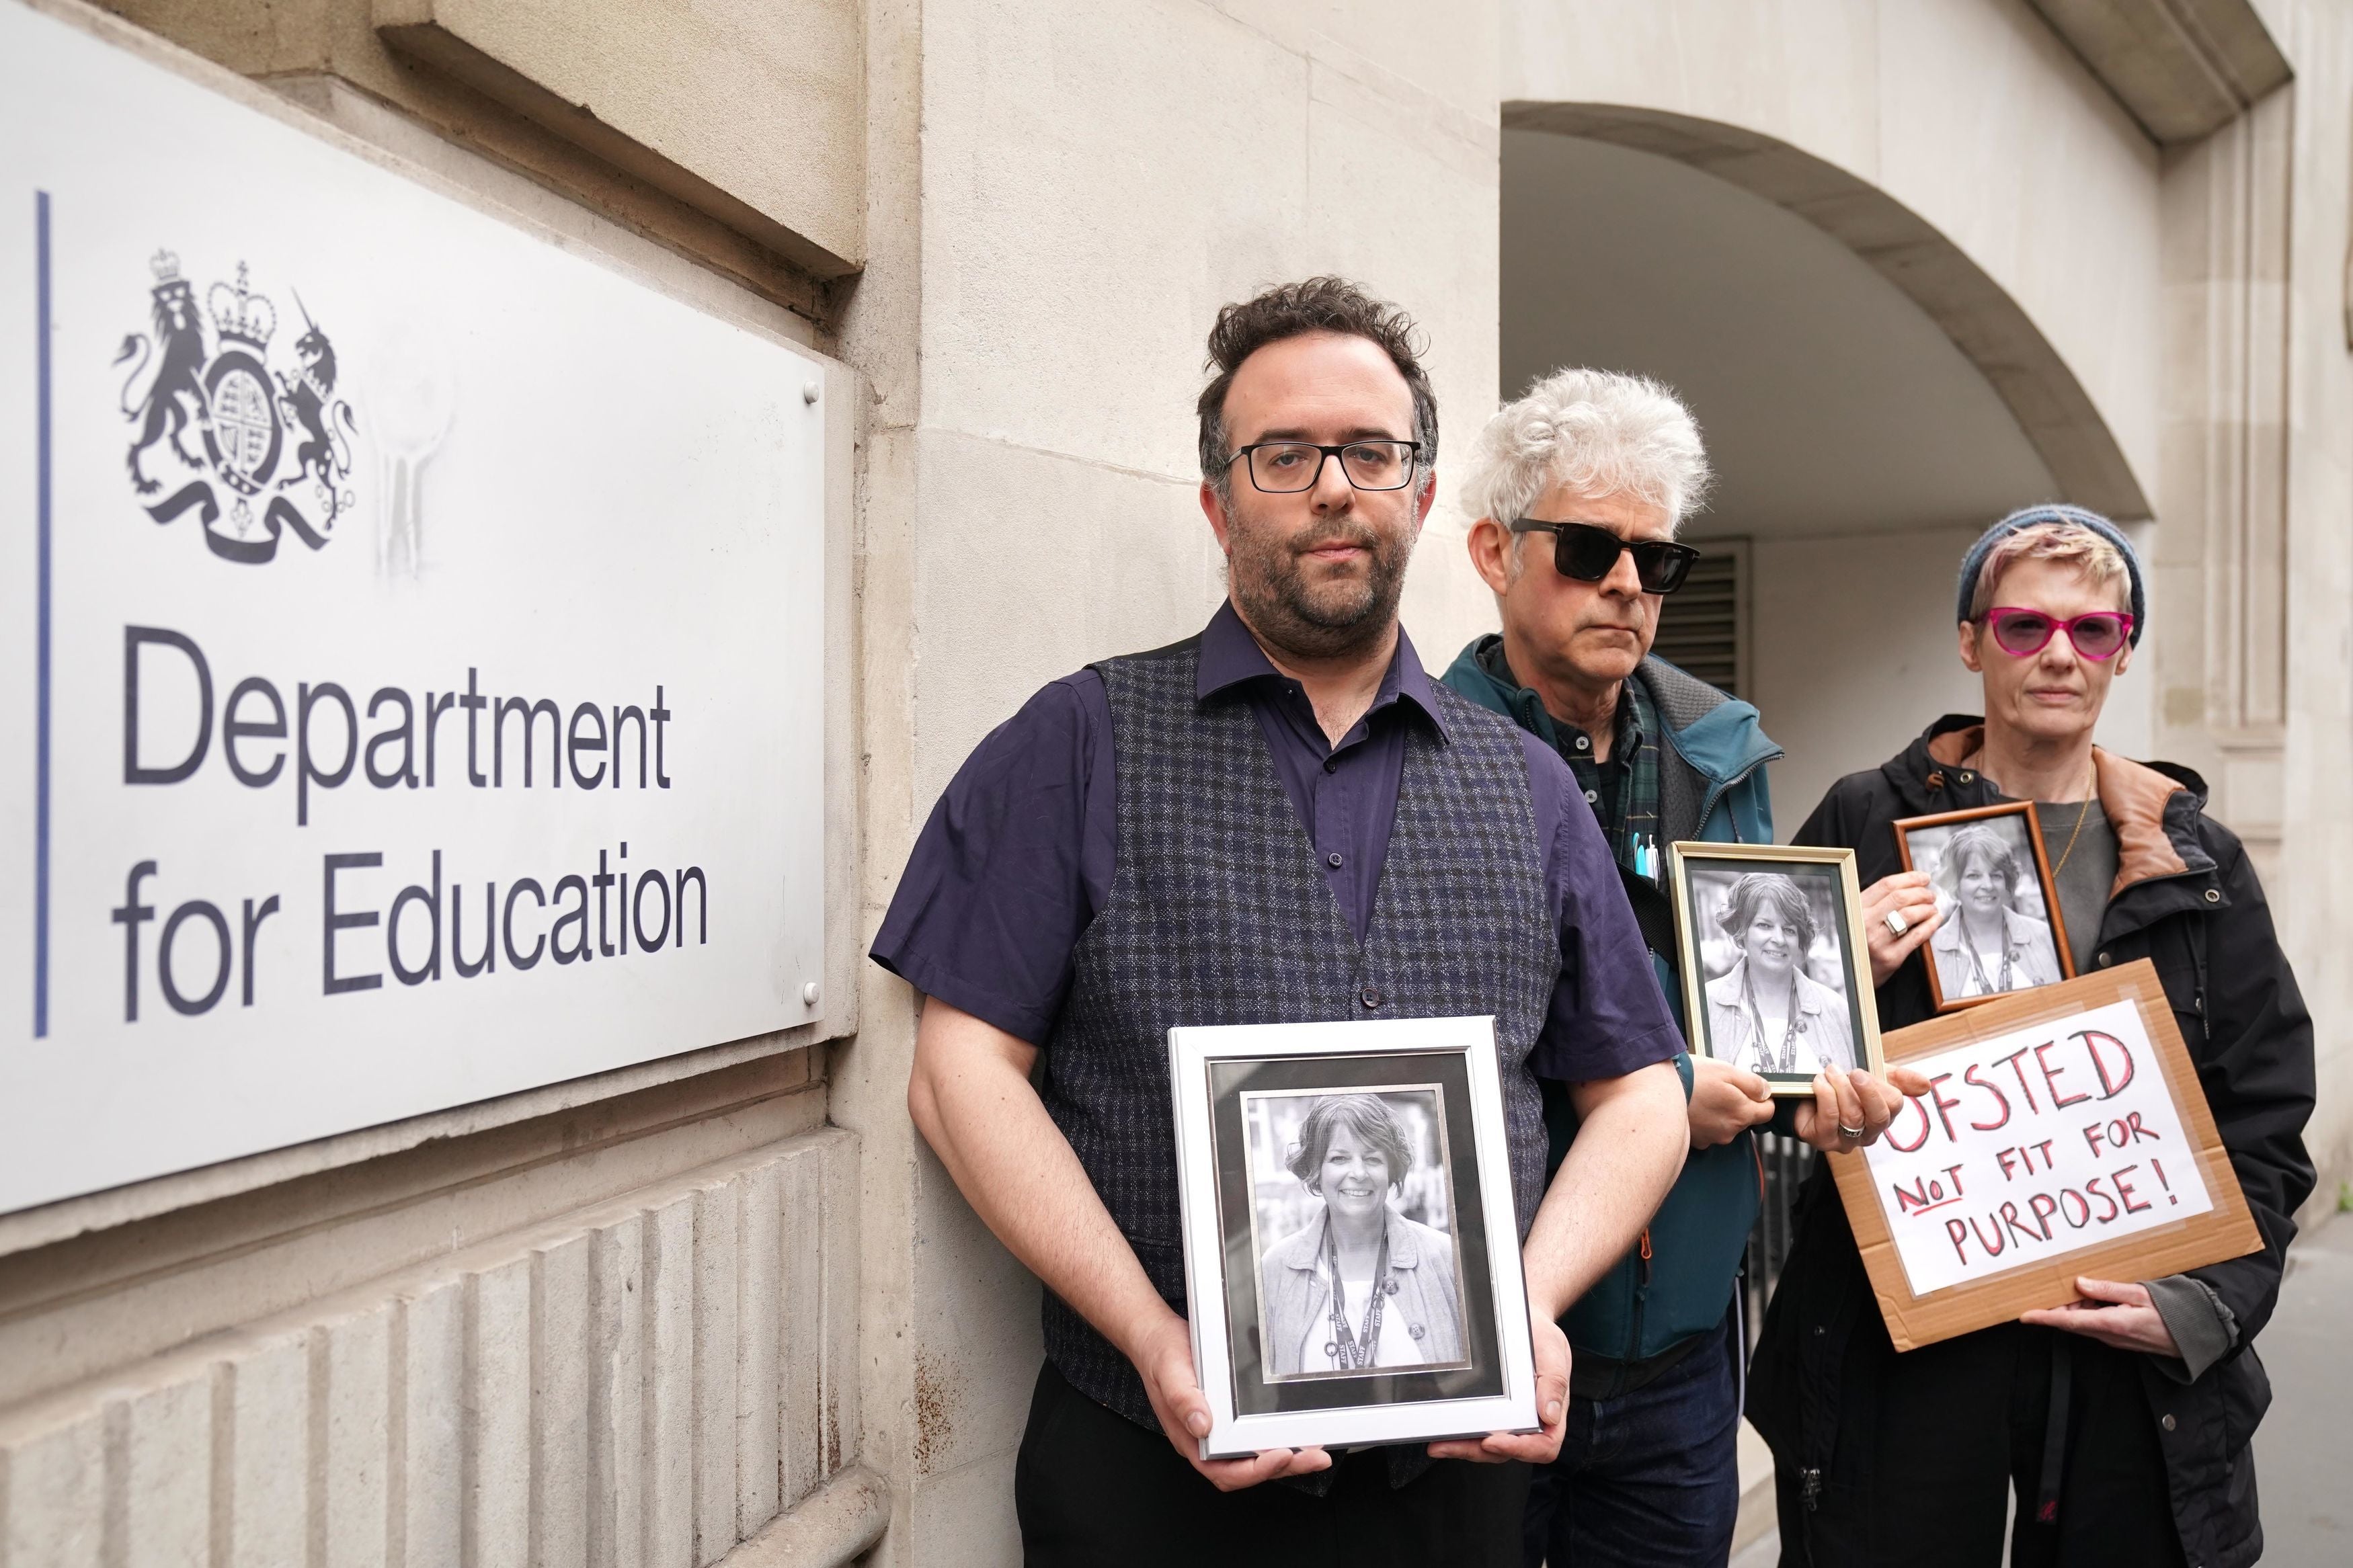 Members of UNISON protest against Ofsted following the death